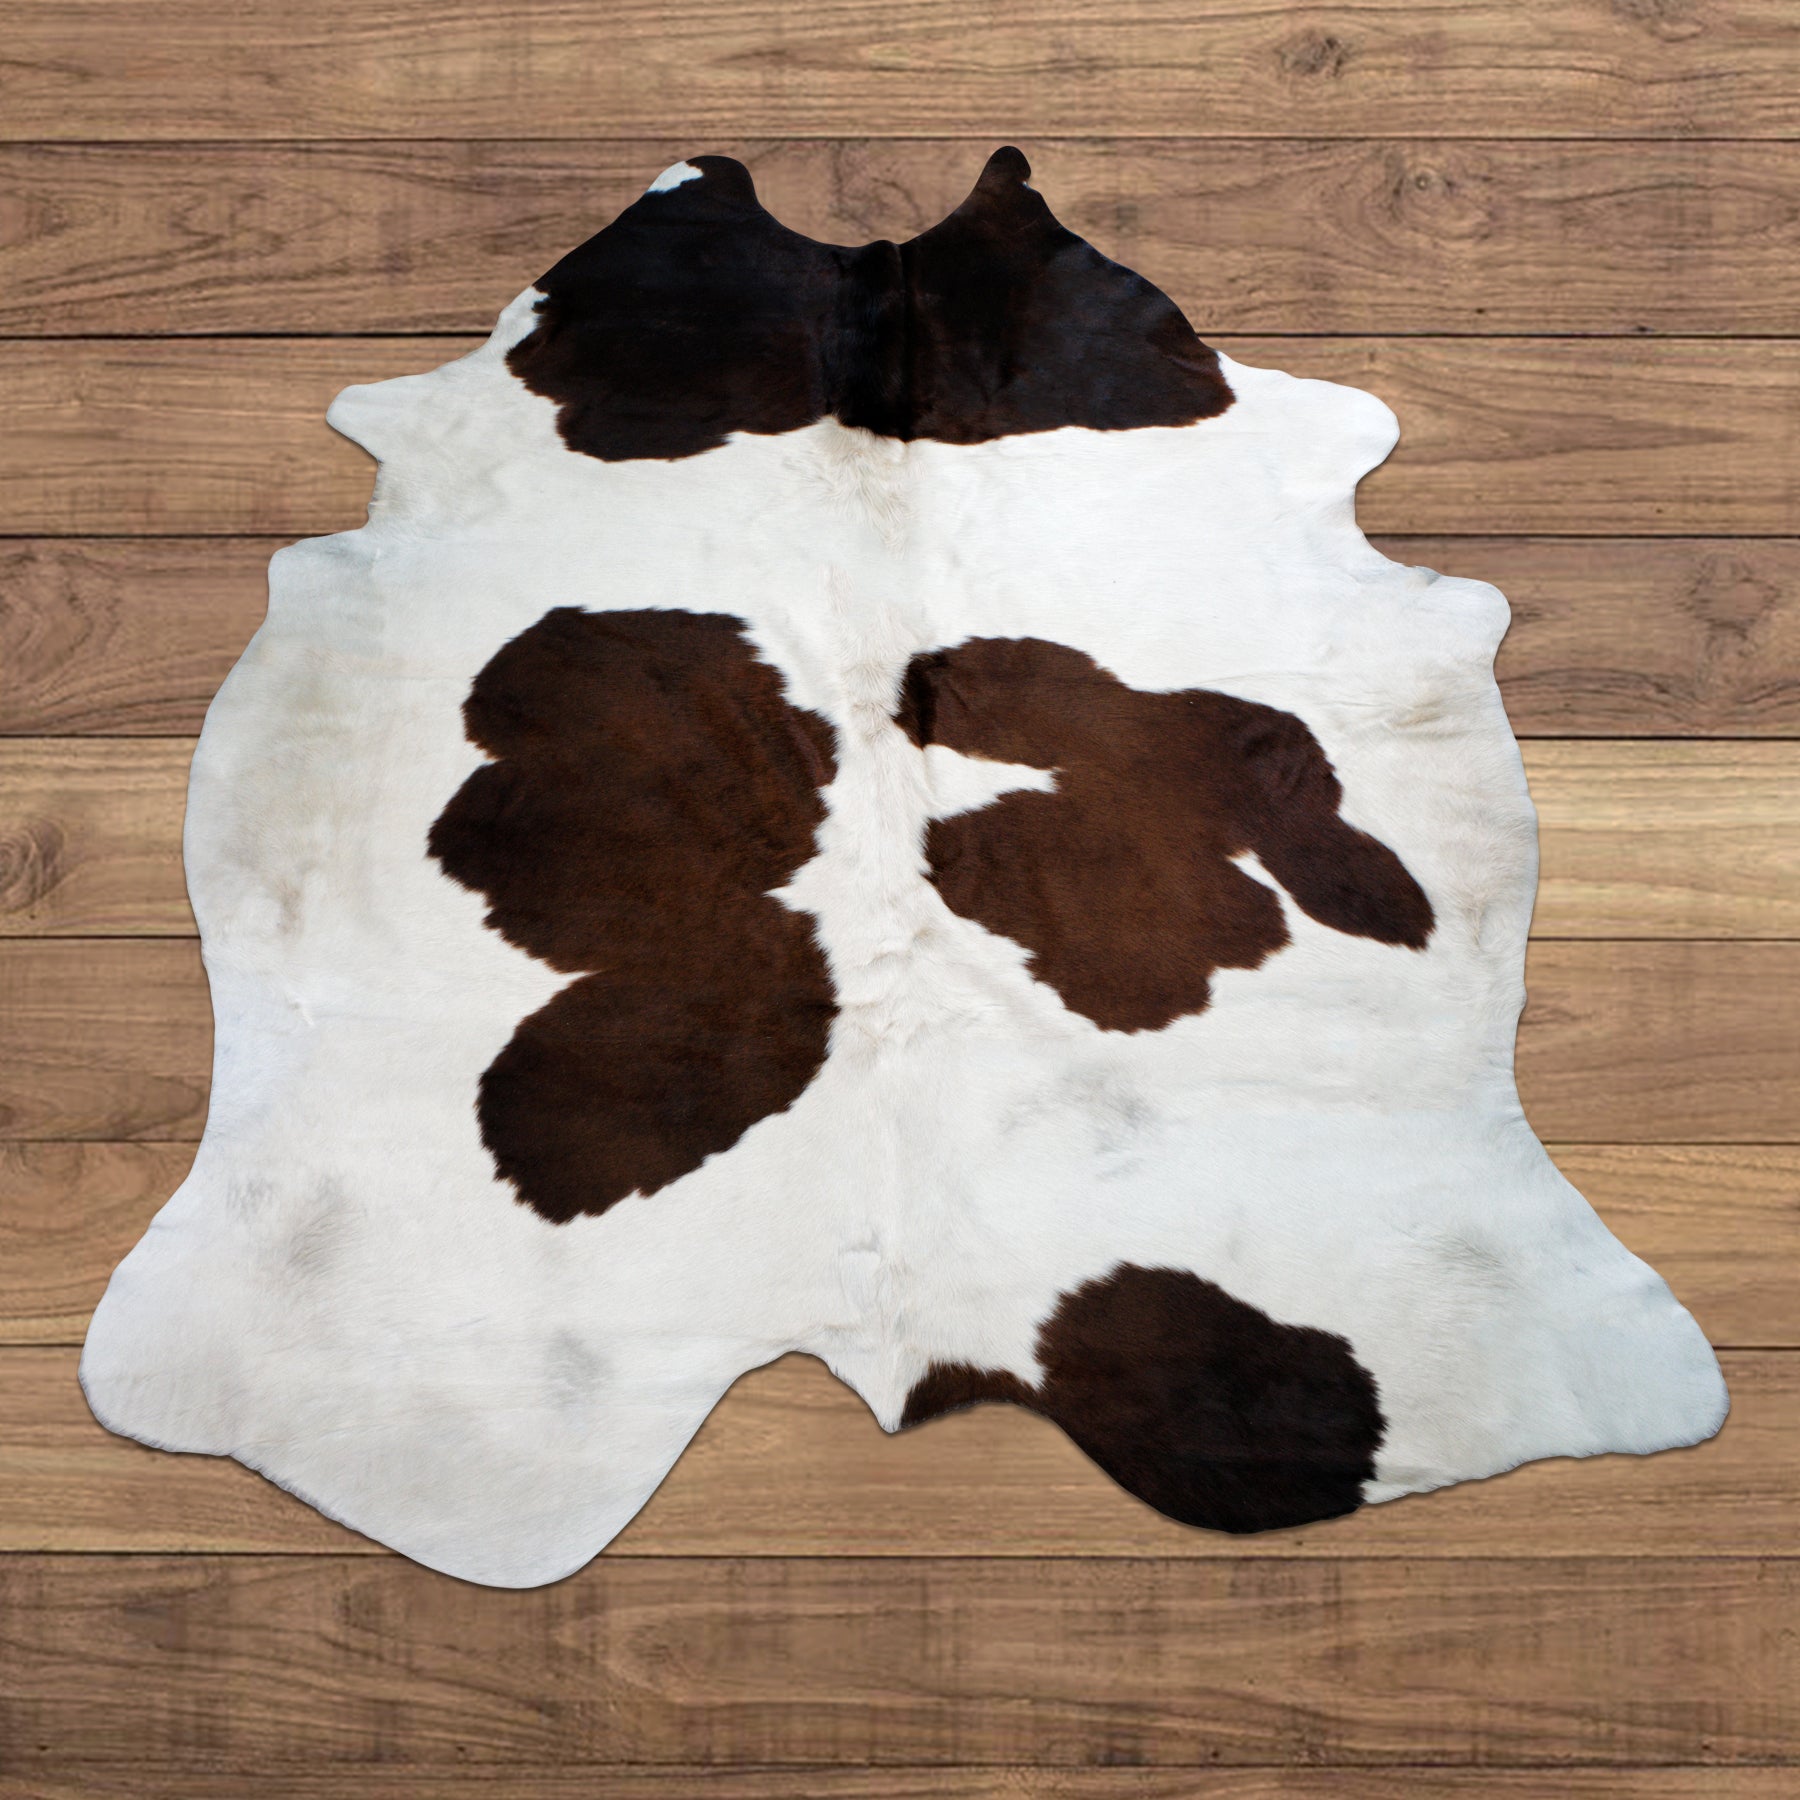 Extra Large RODEO dark red brown and white cowhide rug 6.2x 8 ft-- -4329 - Rodeo Cowhide Rugs